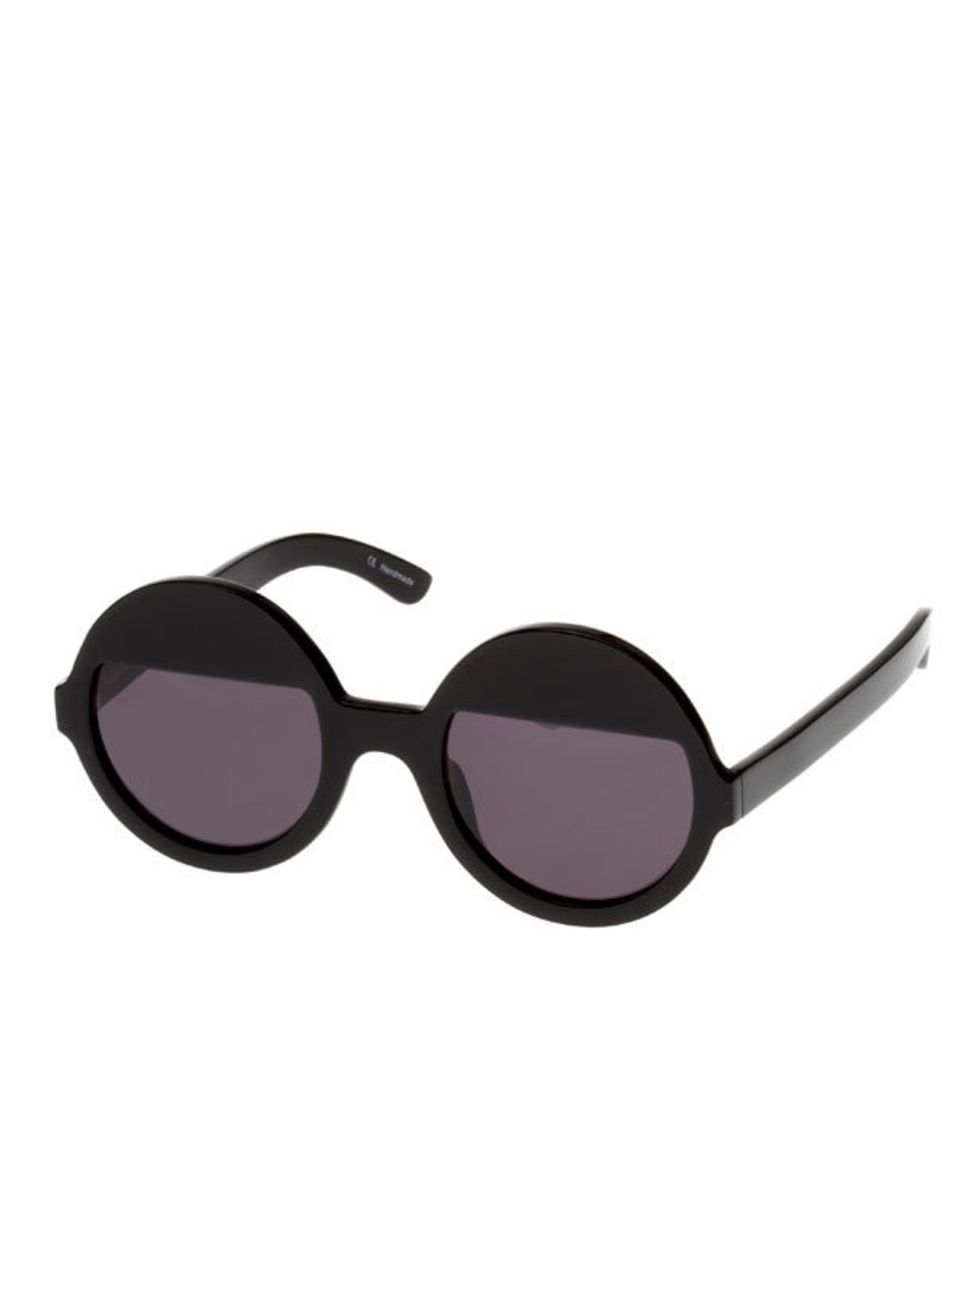 <p>Stamp some directional glamour on your summer wardrobe just like certified fan Abbey Lee Kershaw Ksubi round sunglasses, £195, at <a href="http://www.eyerespect.com/">Eyerespect.com</a></p>